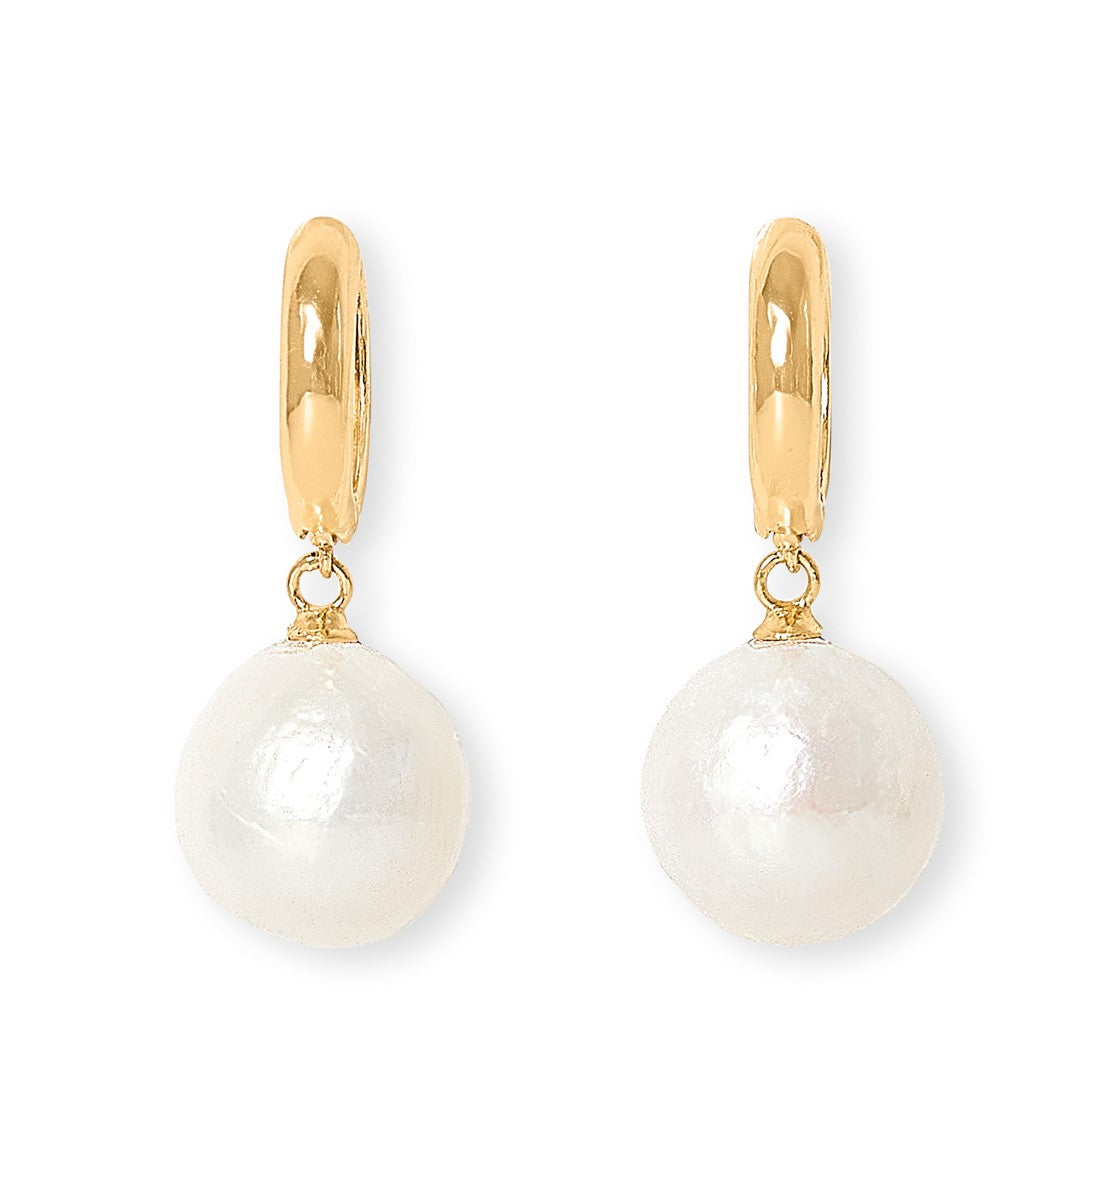 Credo chunky gold hoop earrings with baroque cultured freshwater pearls